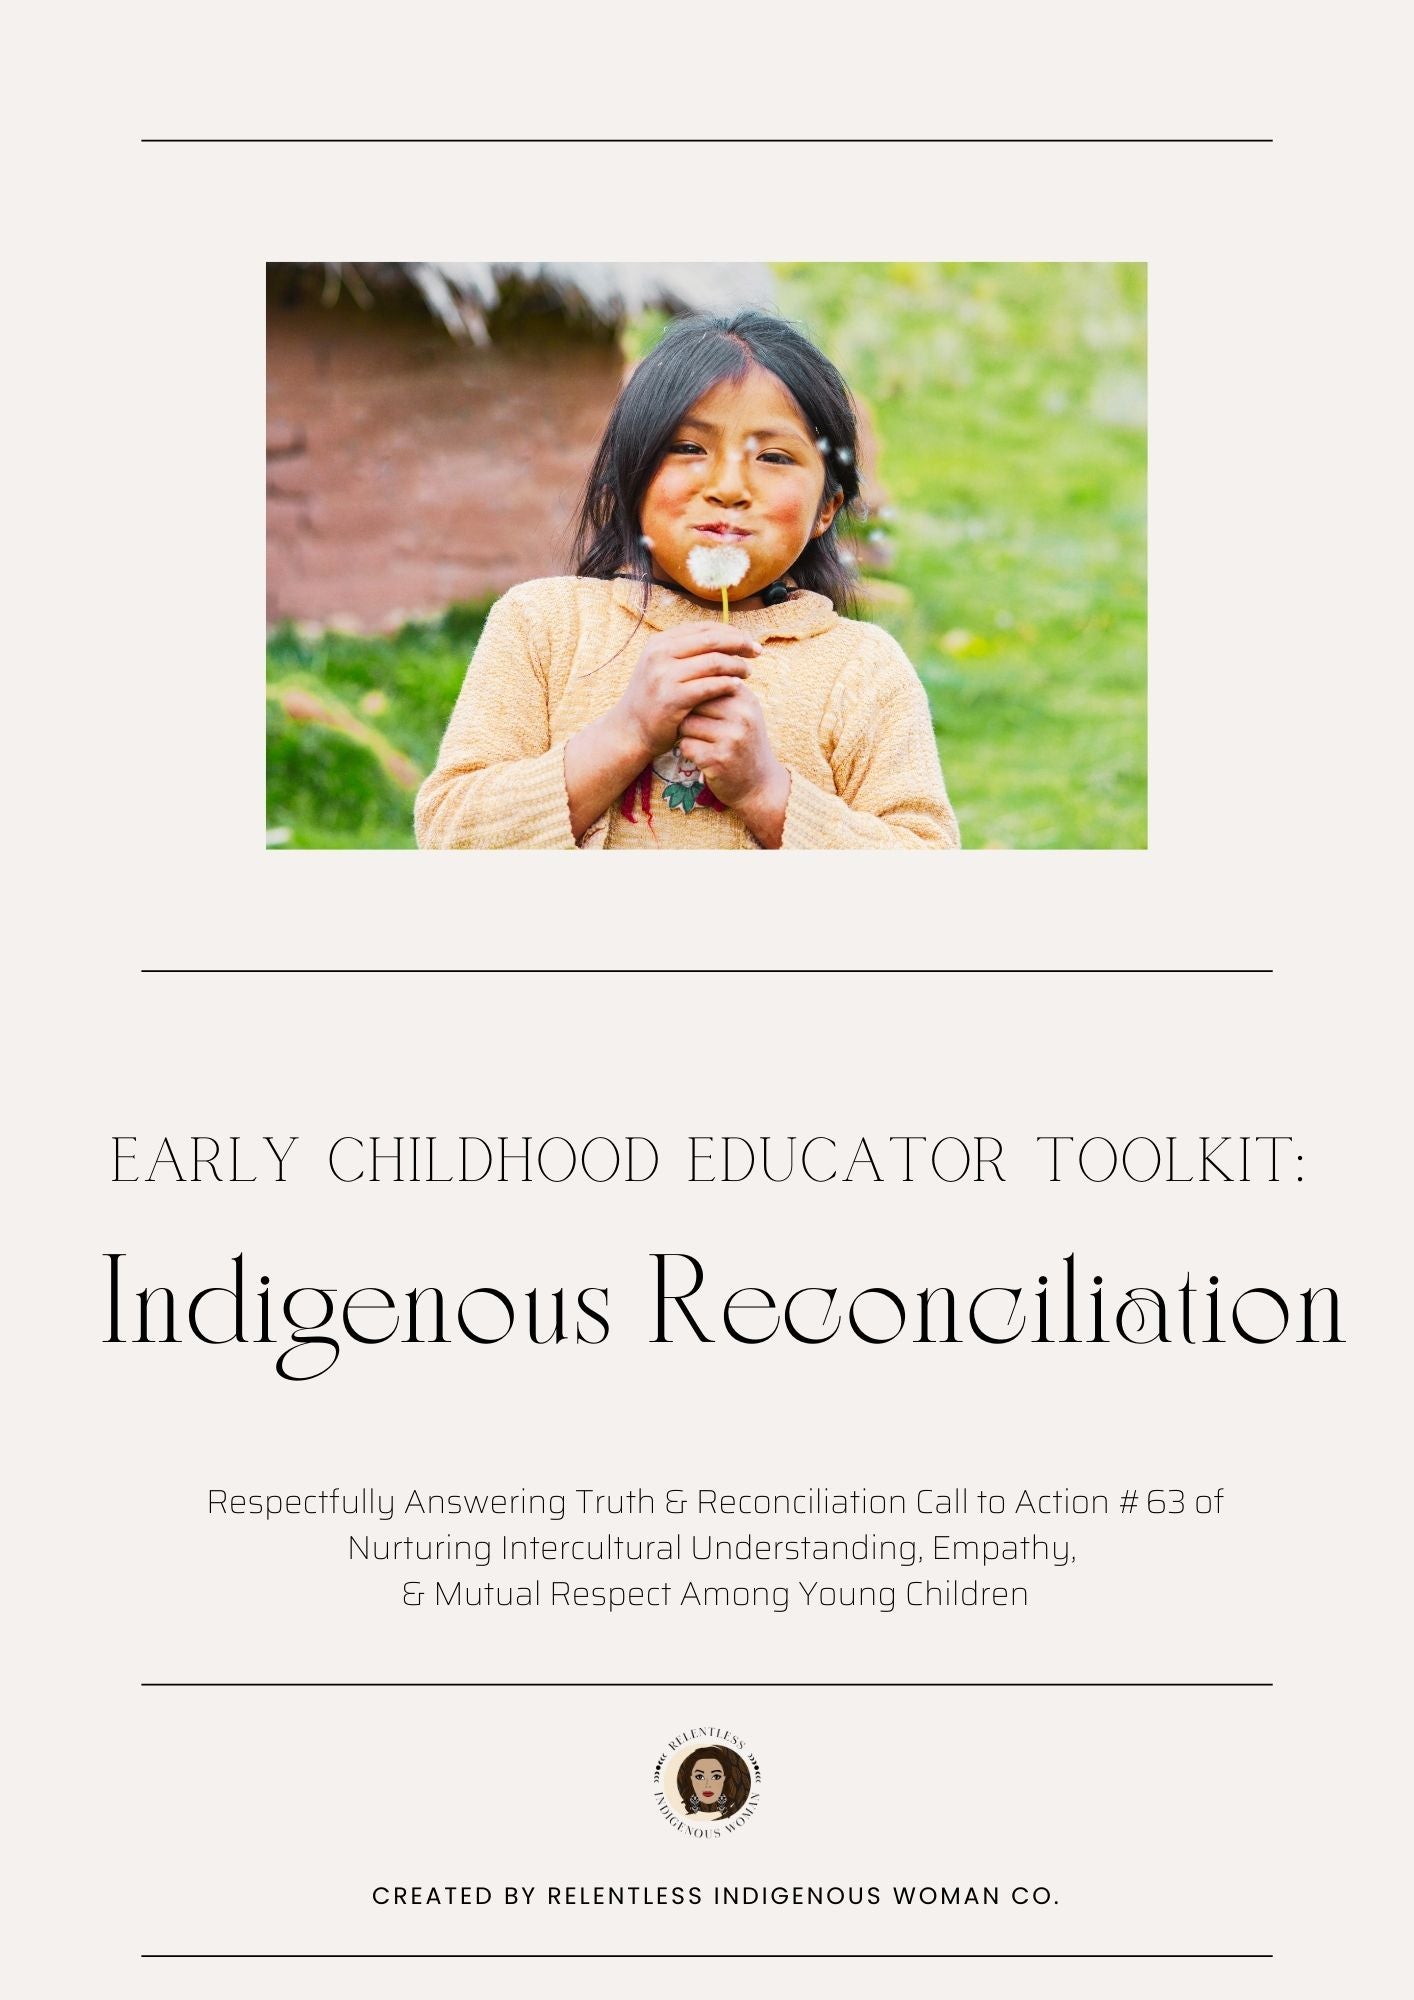 Indigenous Reconciliation Webinar & Toolkit for Early Childhood Educators